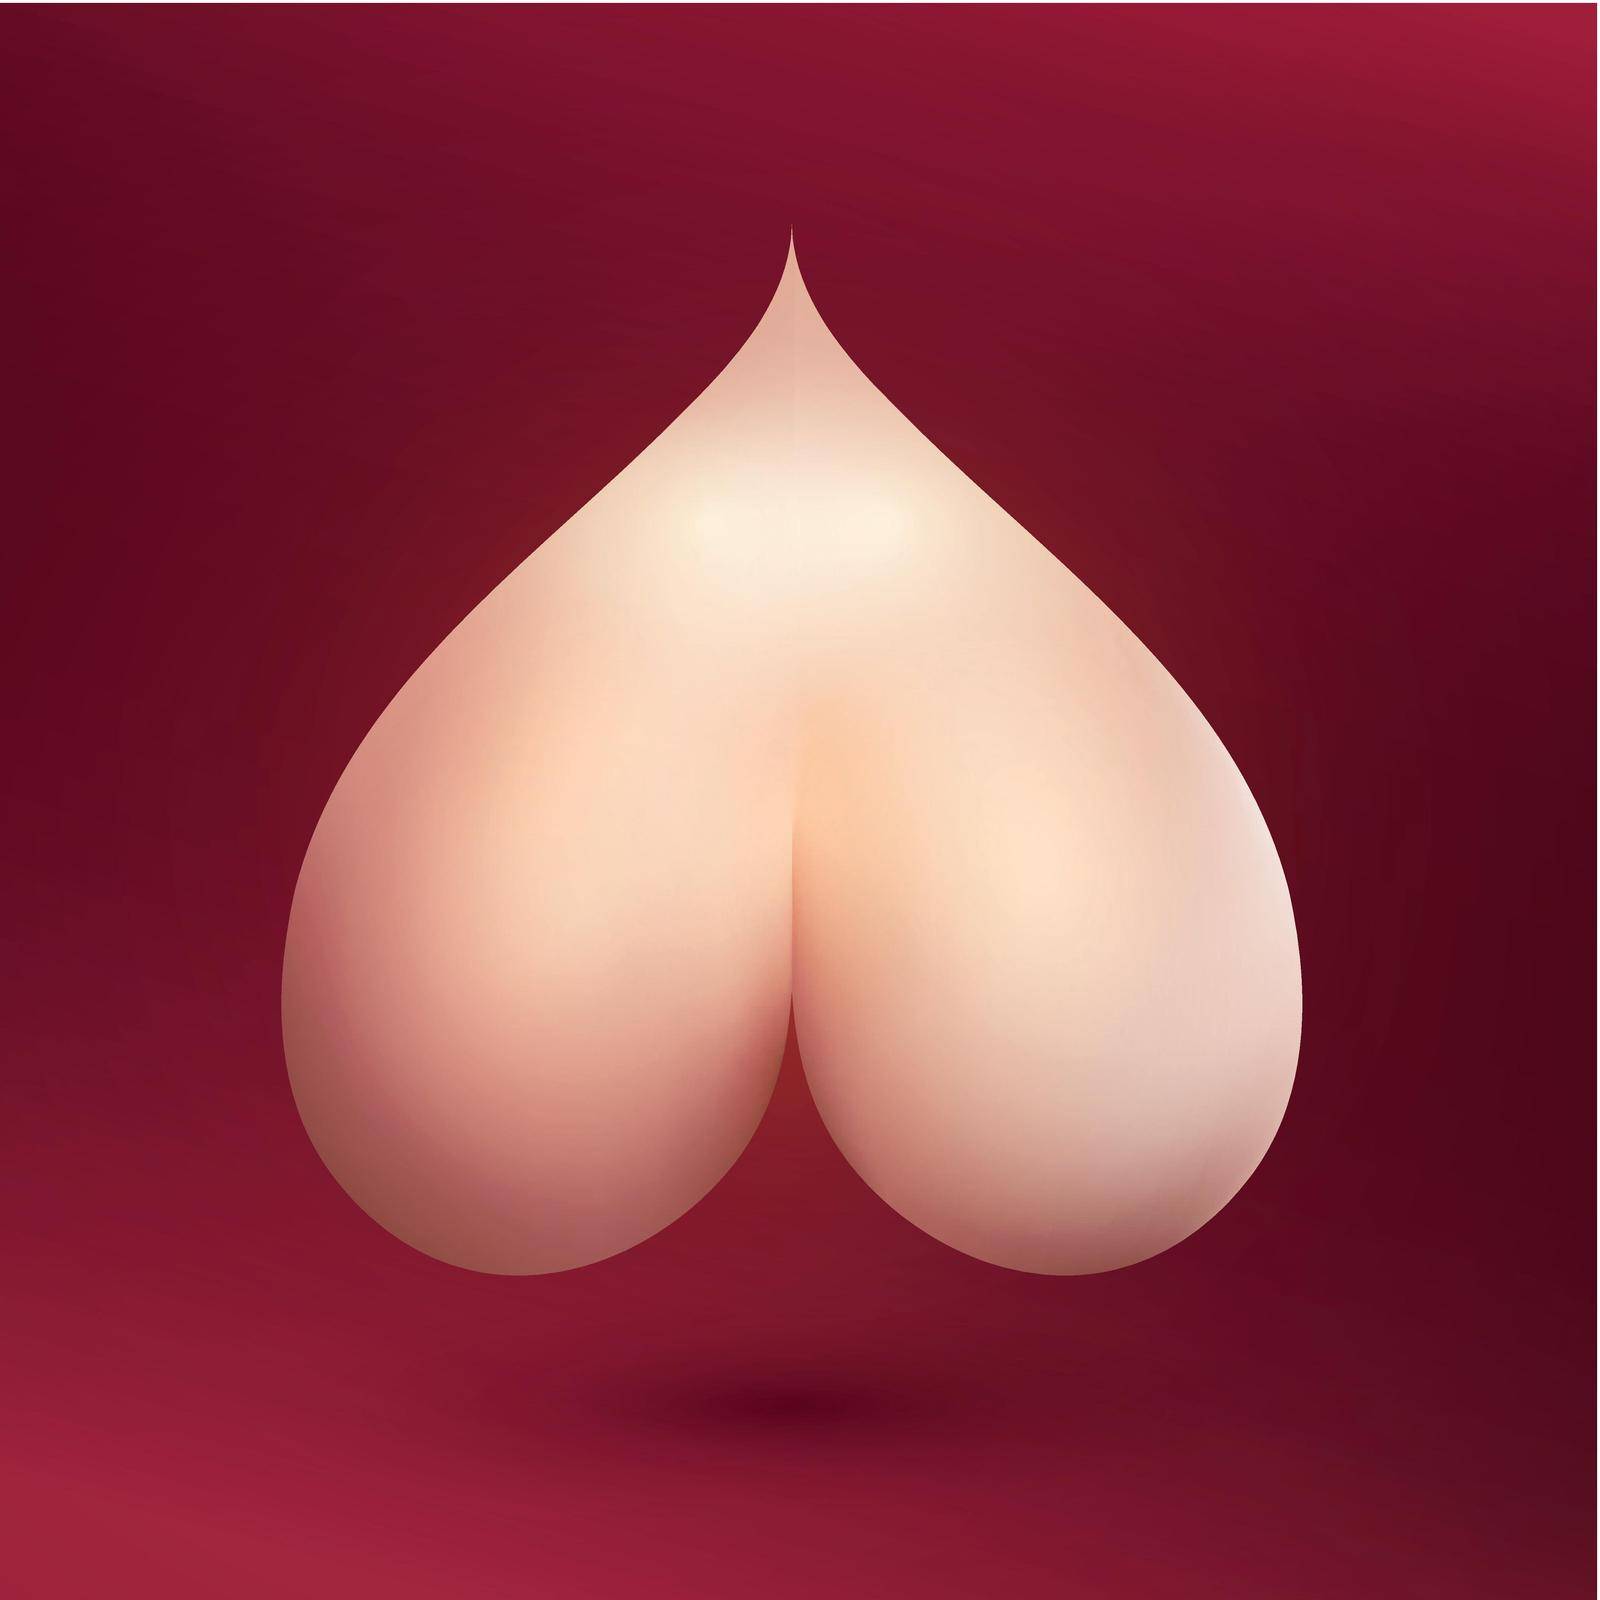 Bare naked bum in shape of Heart on Burgundy background. Vector adult illustration for sex shop of erotic web site.